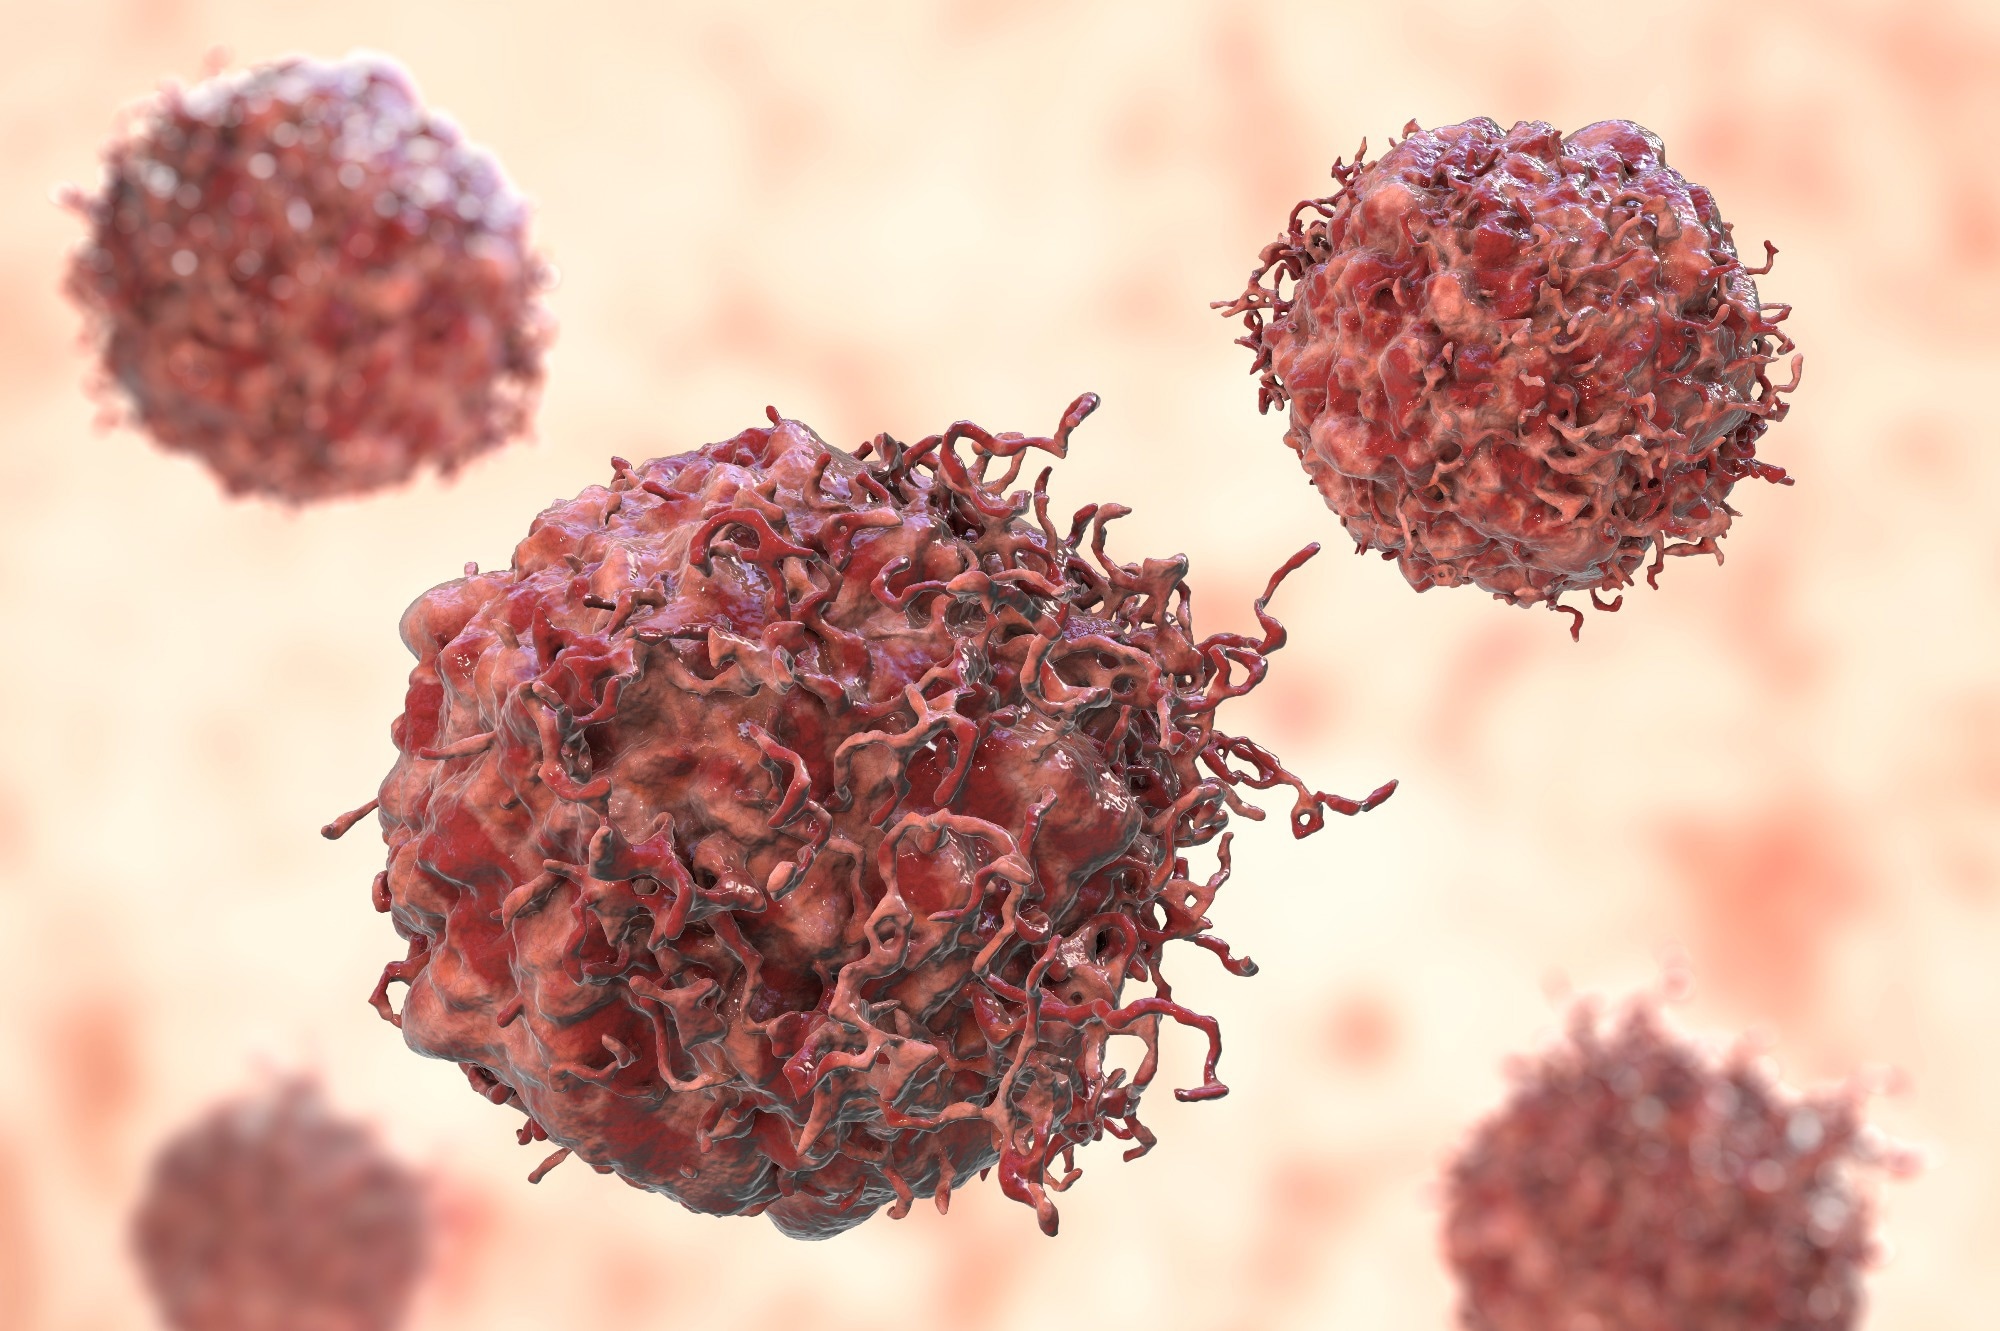 Study: TCF-1 limits intraepithelial lymphocyte antitumor Q1 immunity in colorectal carcinoma. Image Credit: Kateryna Kon / Shutterstock.com